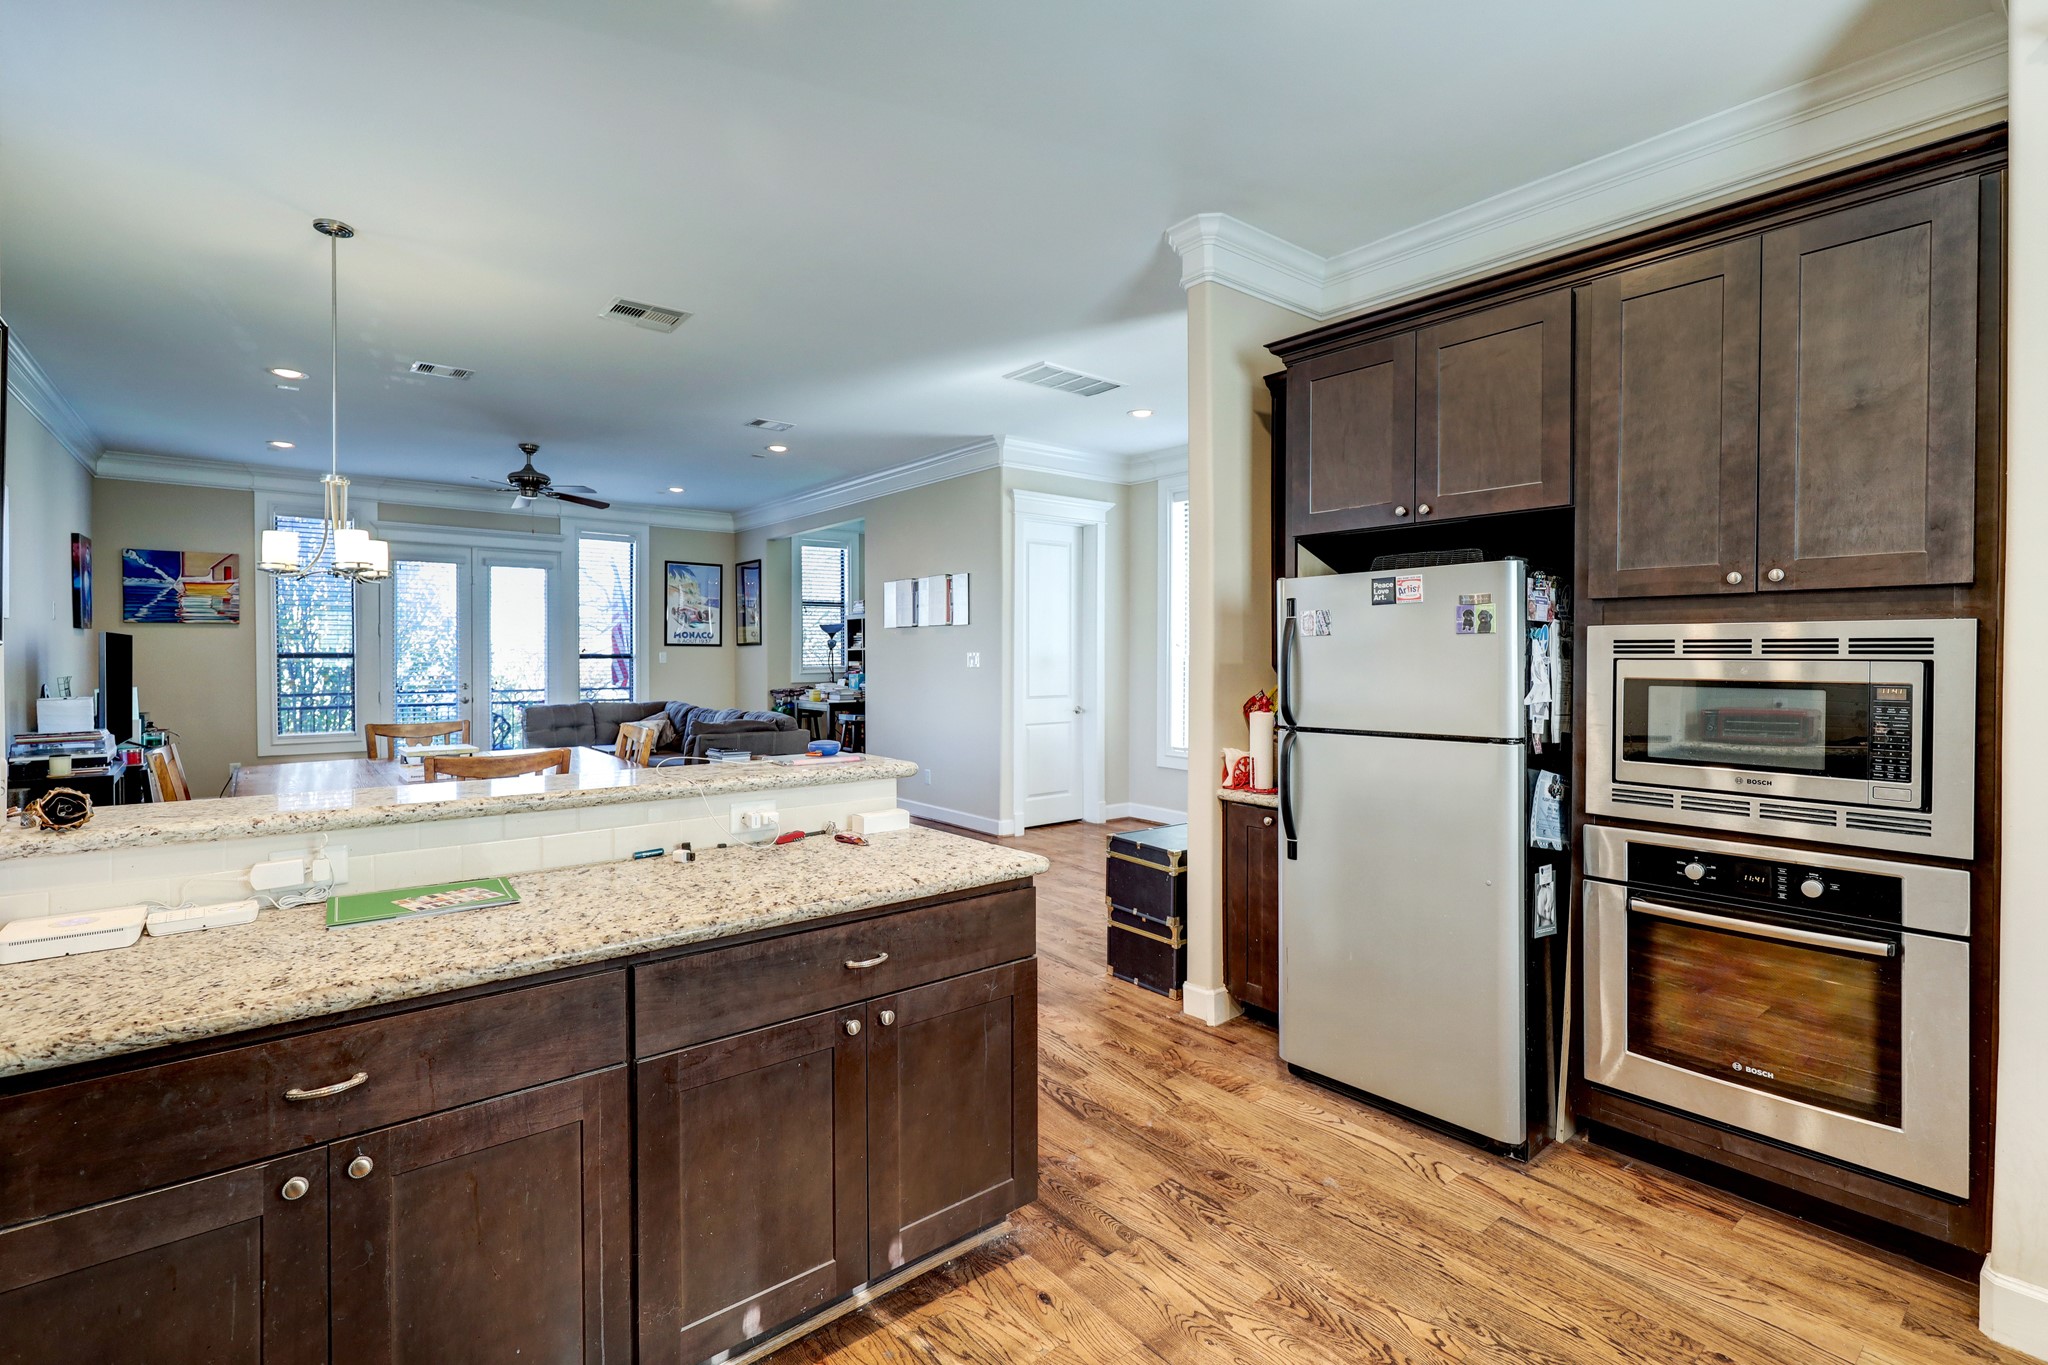 The kitchen opens up to the dining room which is perfect for entertaining. Noticed the built-in over and microwave.